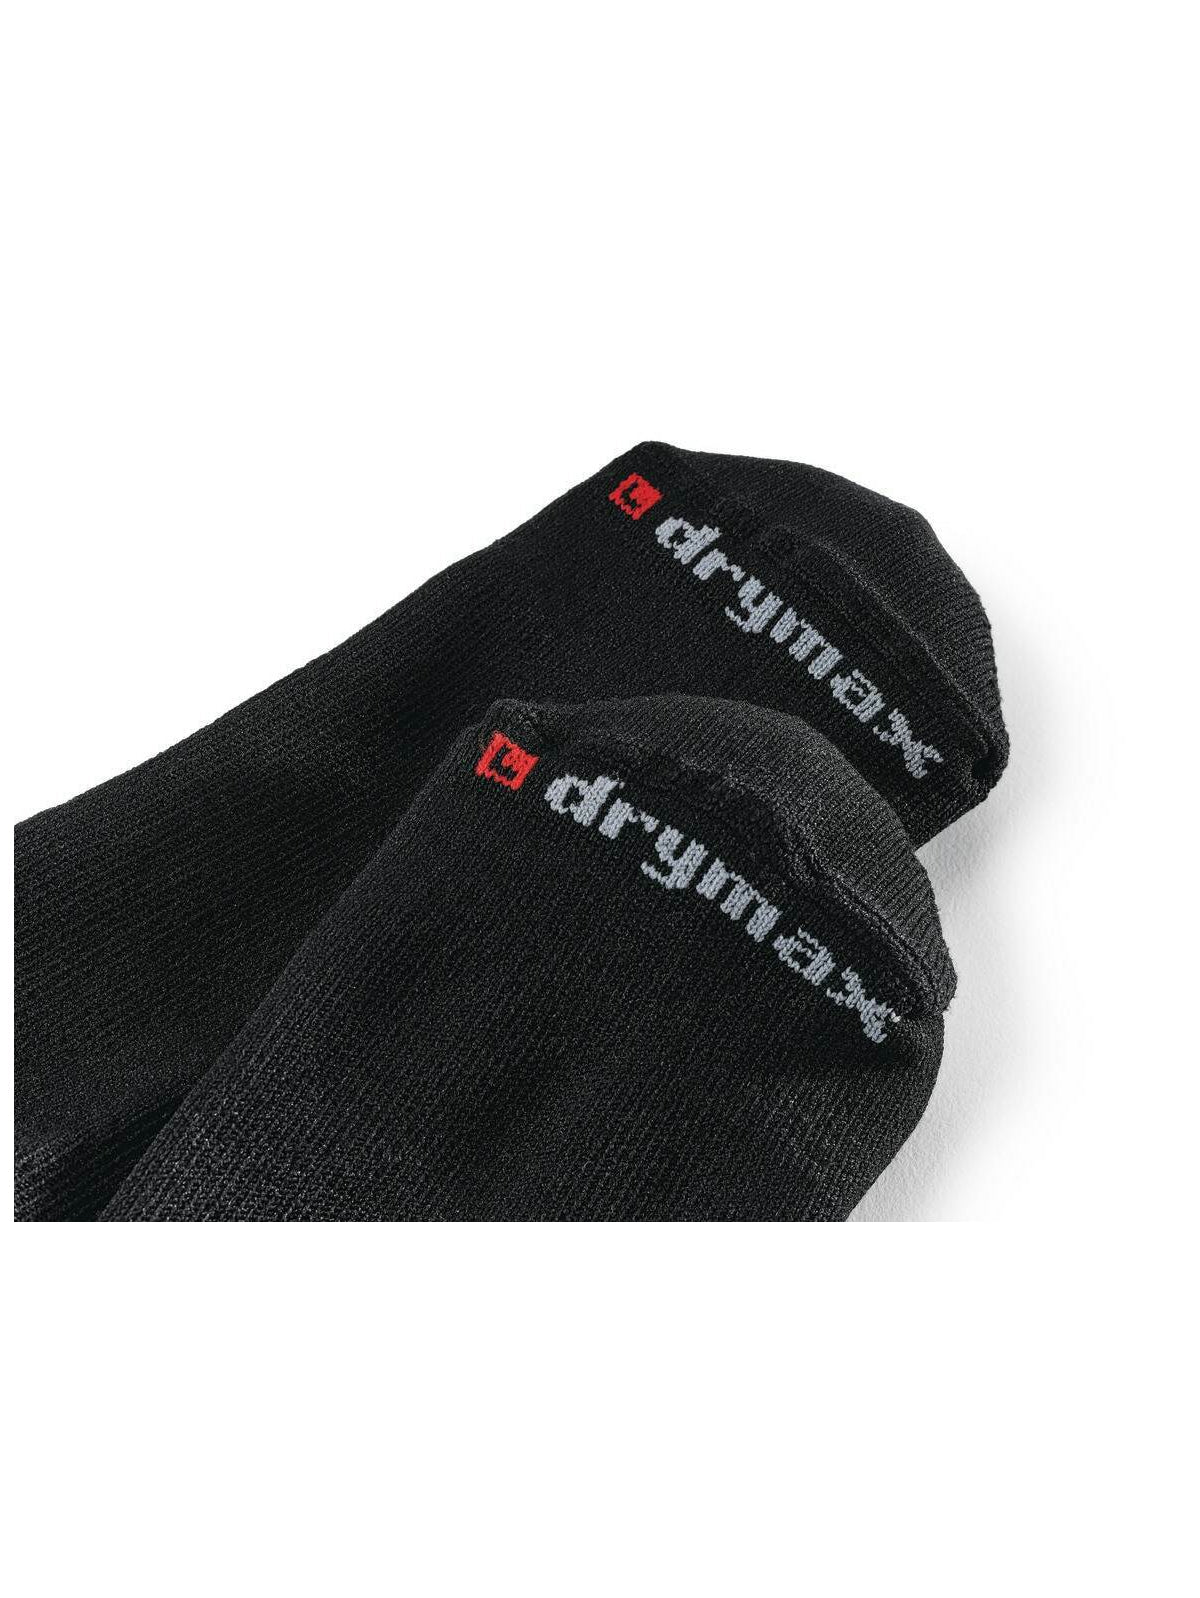 Unisex No-Show Sock Black by Shoes For Crews -  ChefsCotton